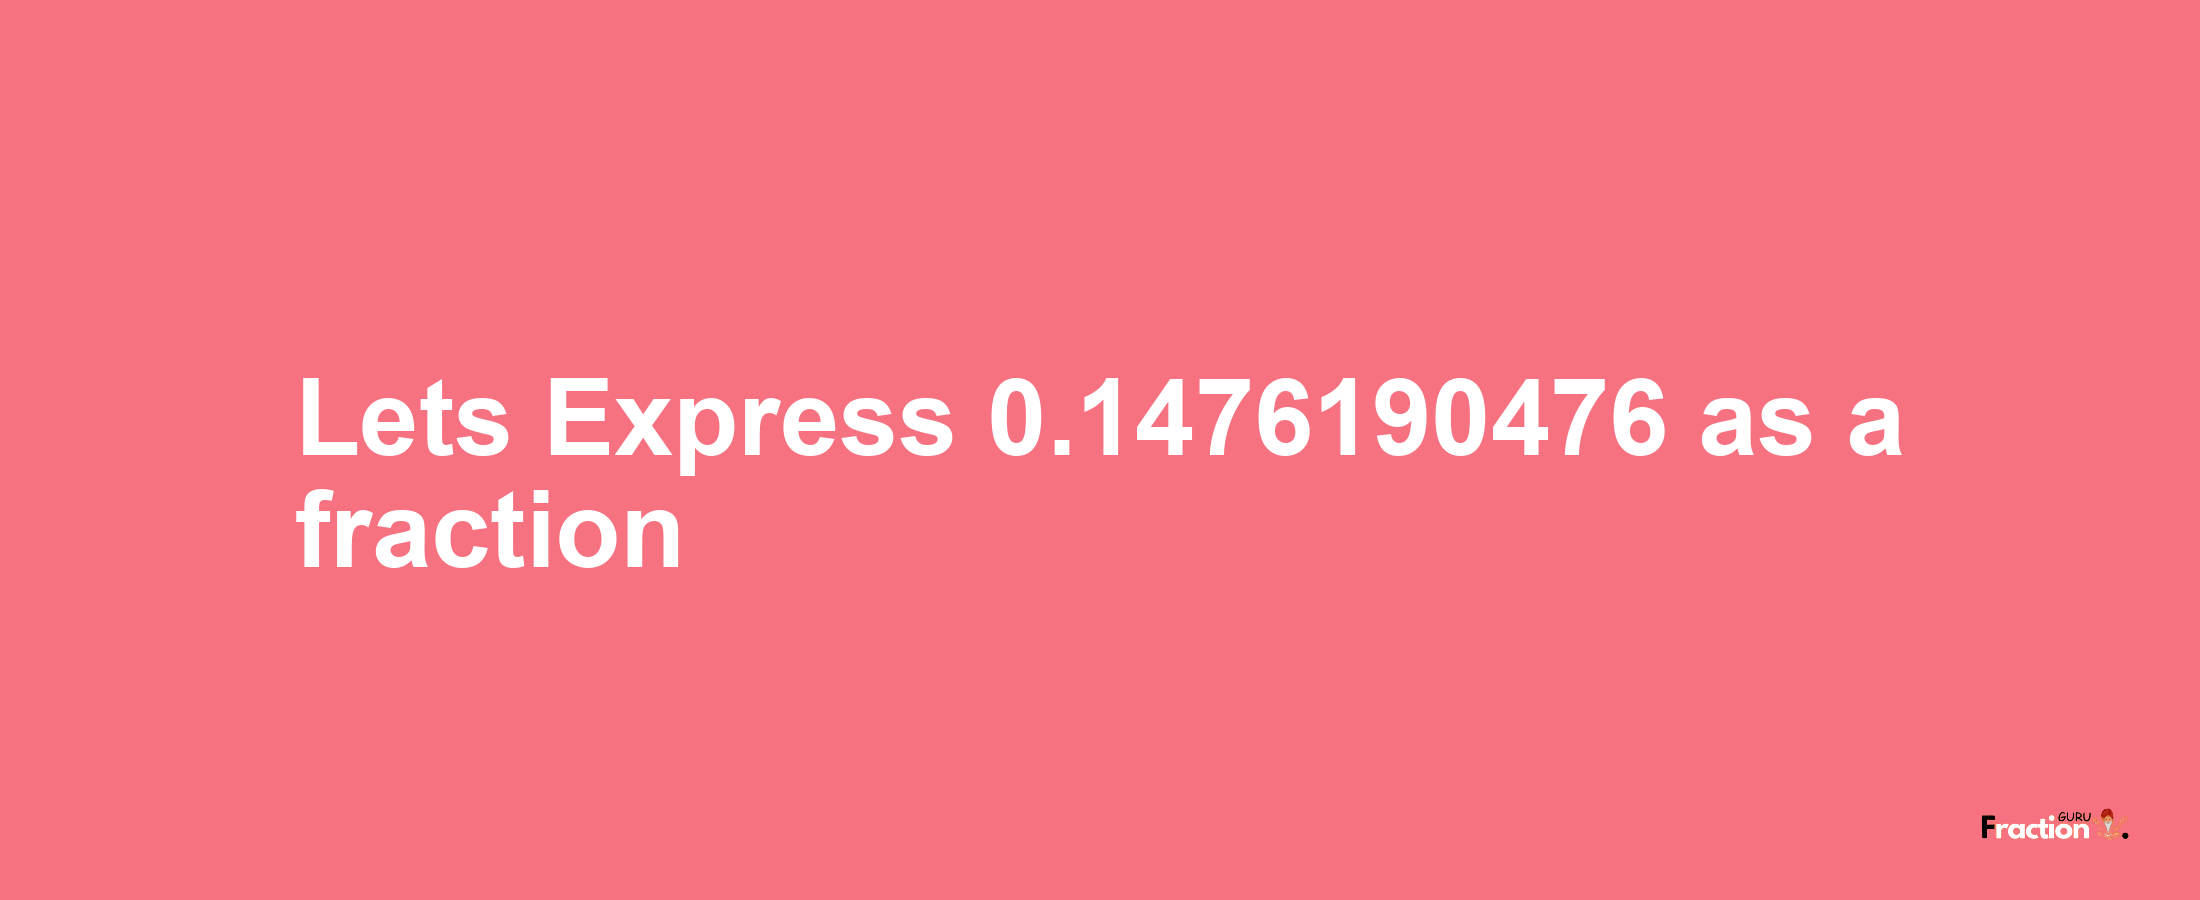 Lets Express 0.1476190476 as afraction